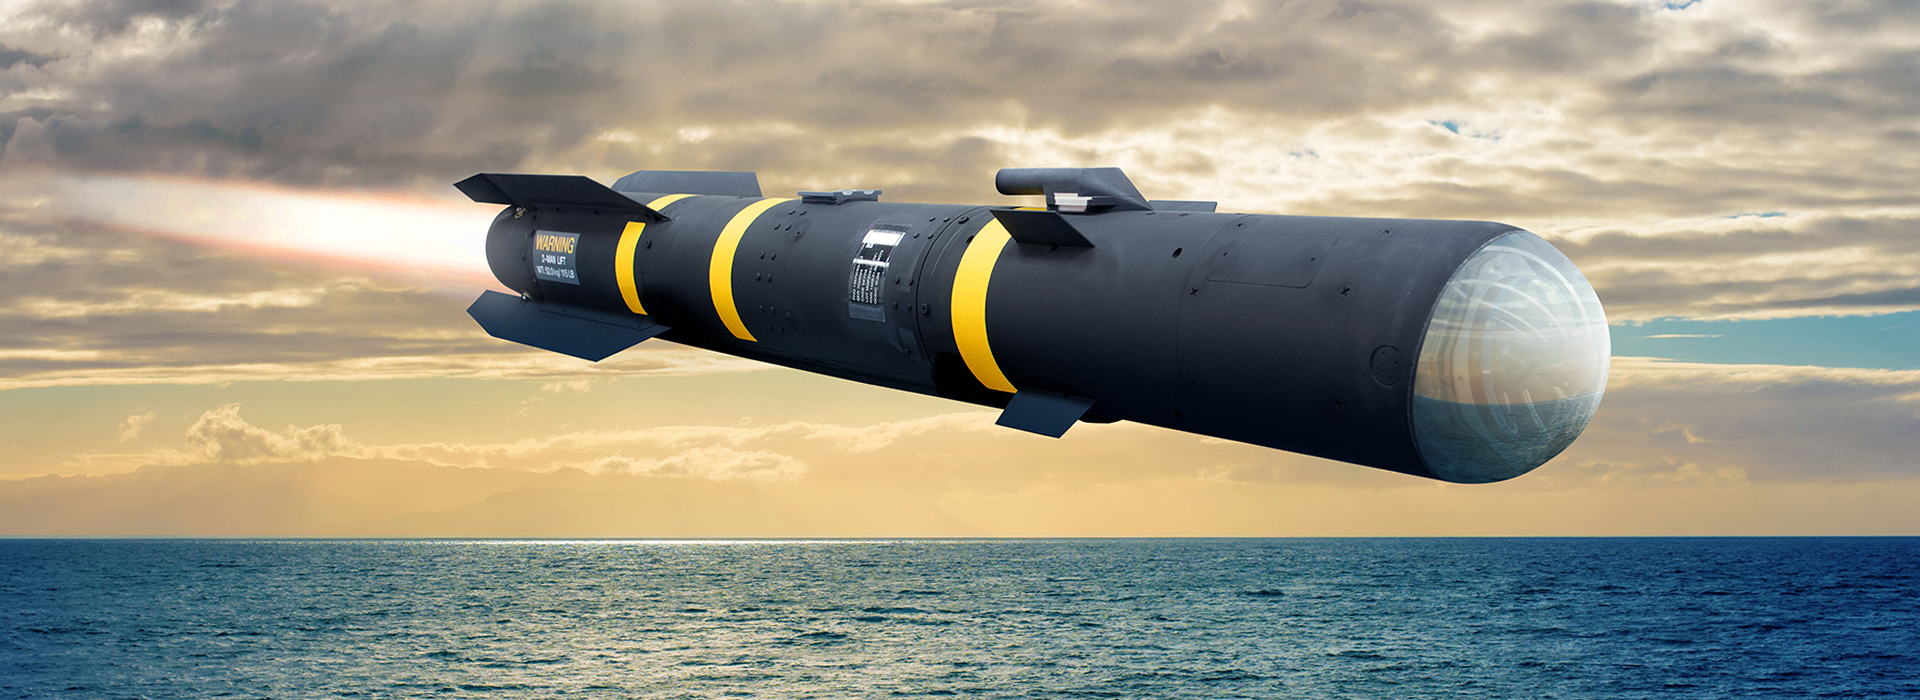 Lockheed Martin's Joint-Air-To-Ground Missile (JAGM) Cleared for Full Rate Production | Lockheed Martin